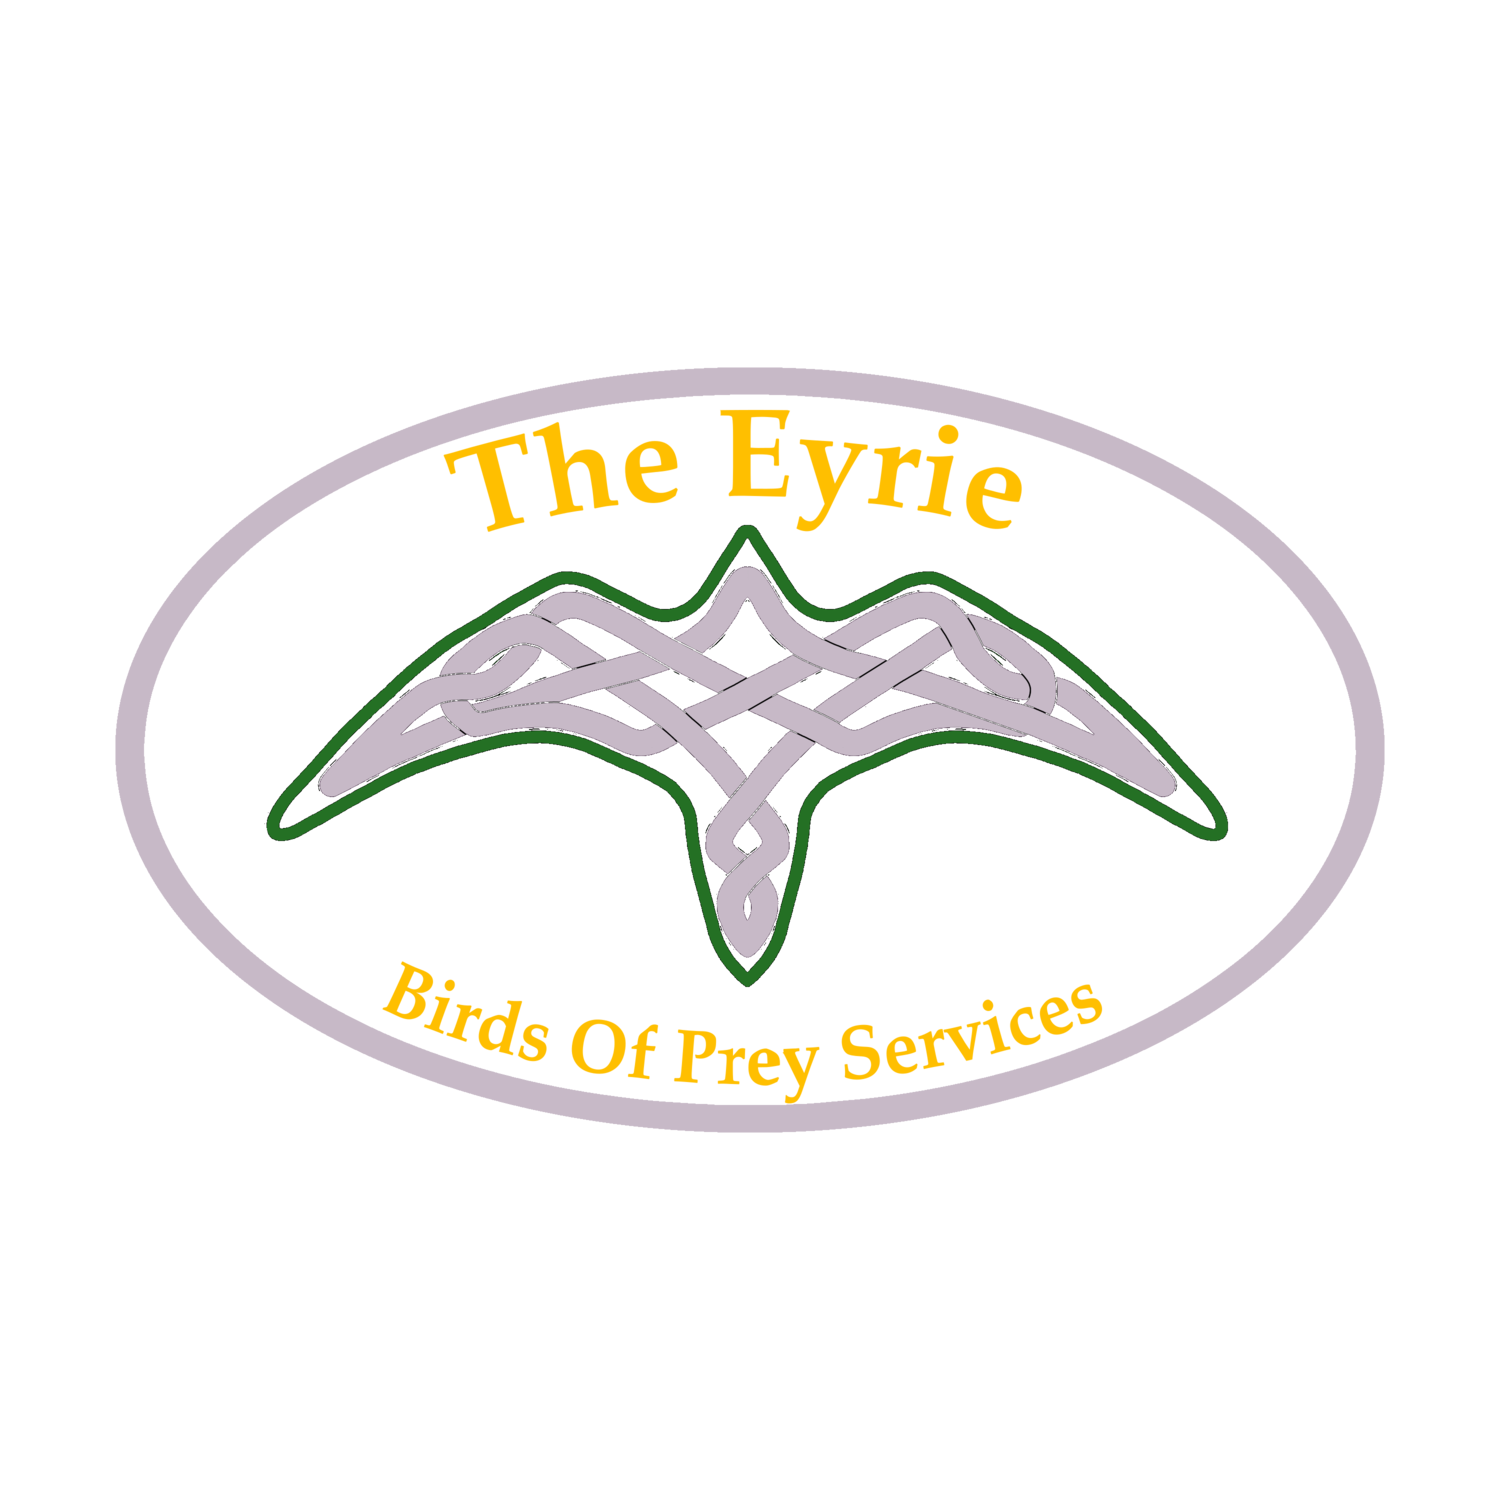 The Eyrie: Birds of Prey Services